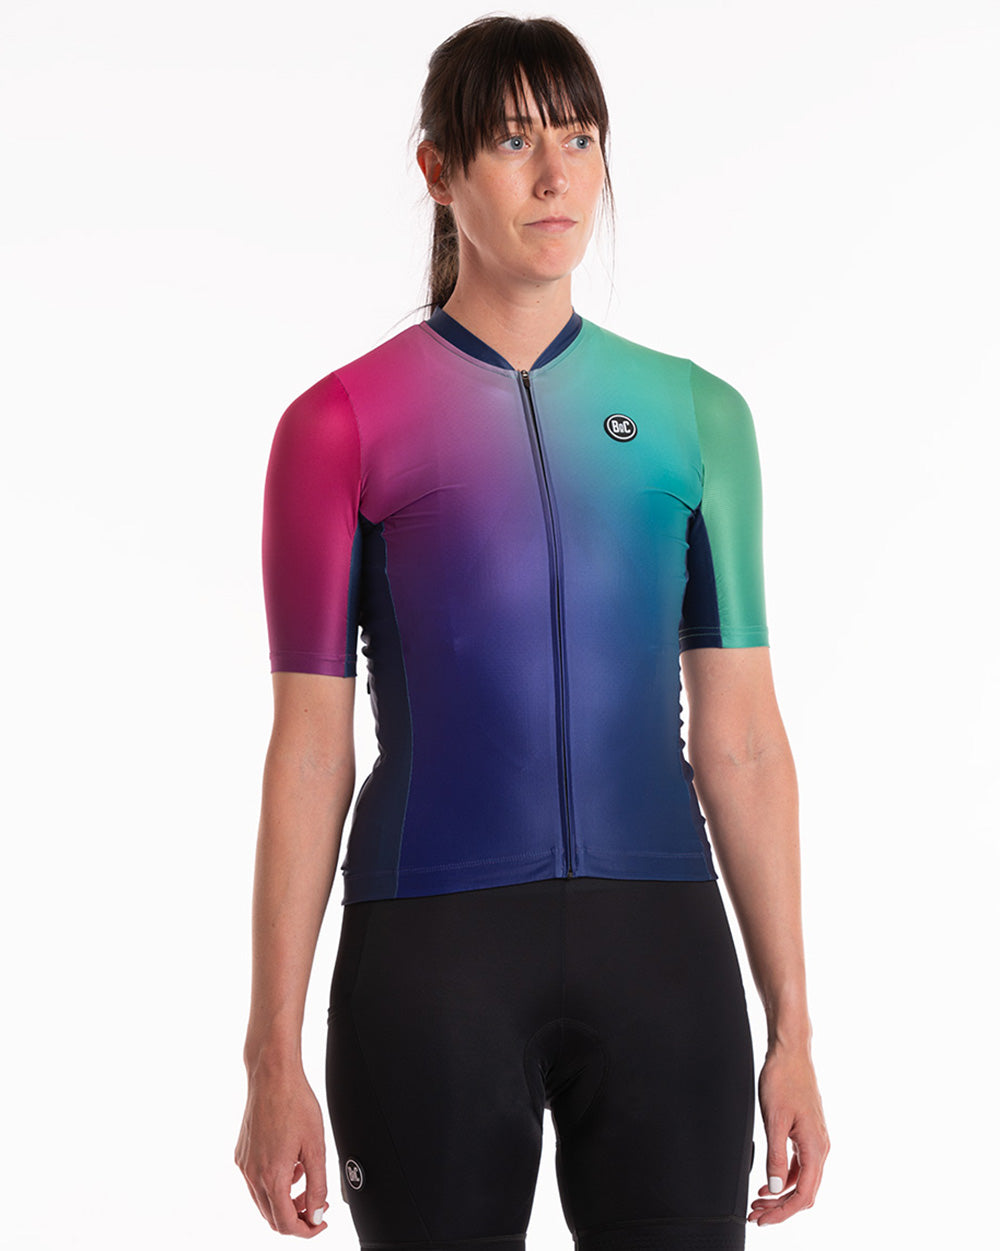 The Women's Above Jersey - Northern Lights